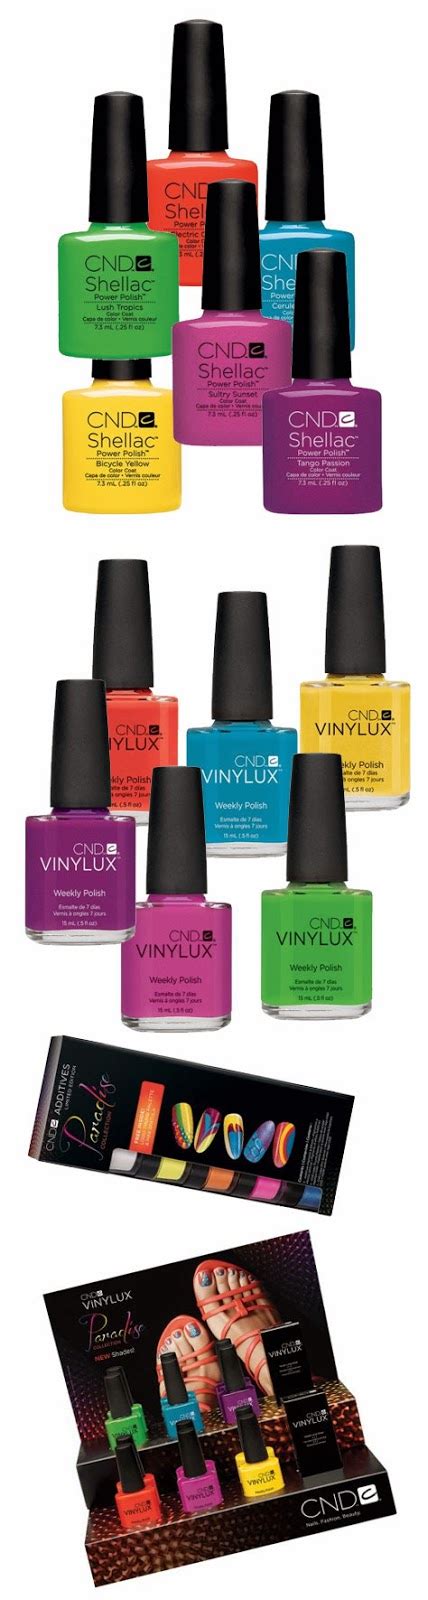 Pure Spa Direct Blog Ahhhhhhh Pardise Cnd Shellac Paradise And Cnd Vinylux Paradise That Is